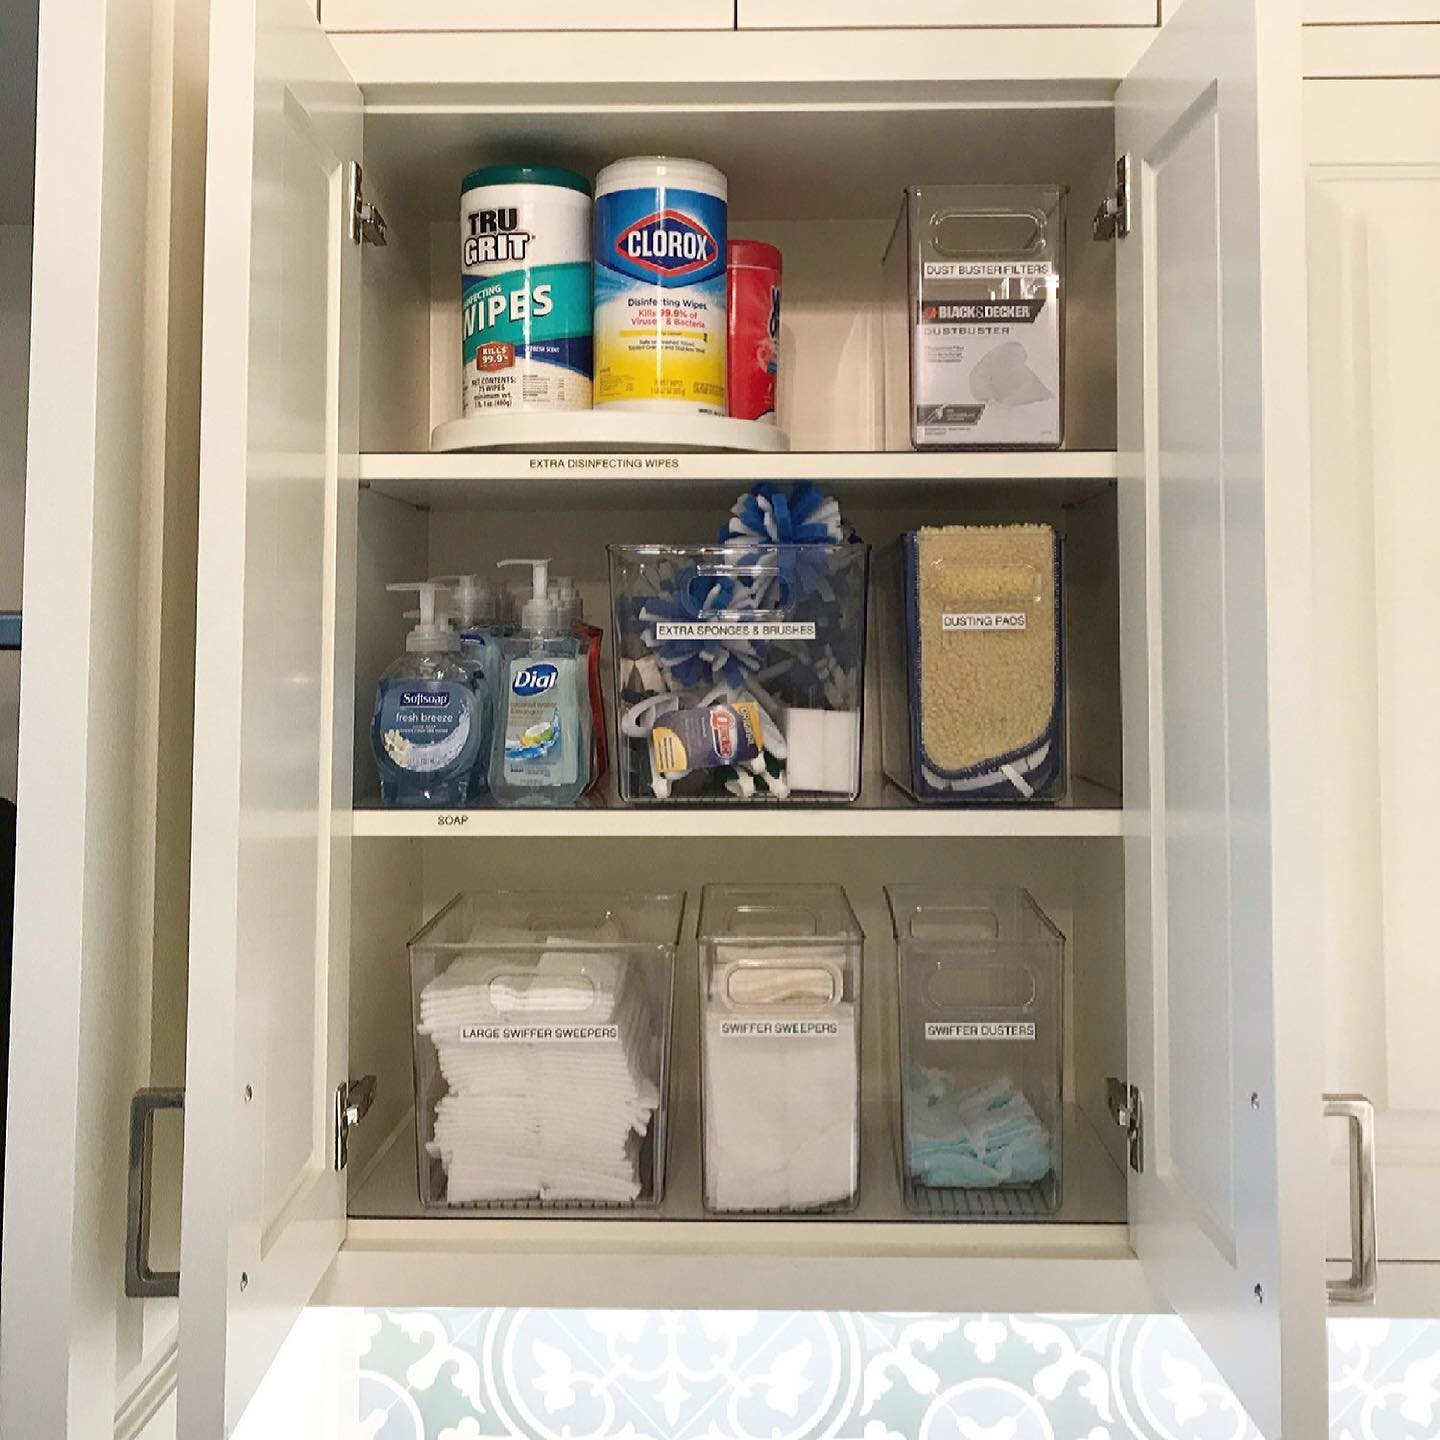 🎶So fresh and so clean, clean🎶
.
.
#sofreshandsoclean #laundryroom #laundryroommakeover #refresh #cleaning #cleaningmotivation #cleaningsupplies #organization #organizingtips #houstonorganizer #crosswellorganizing